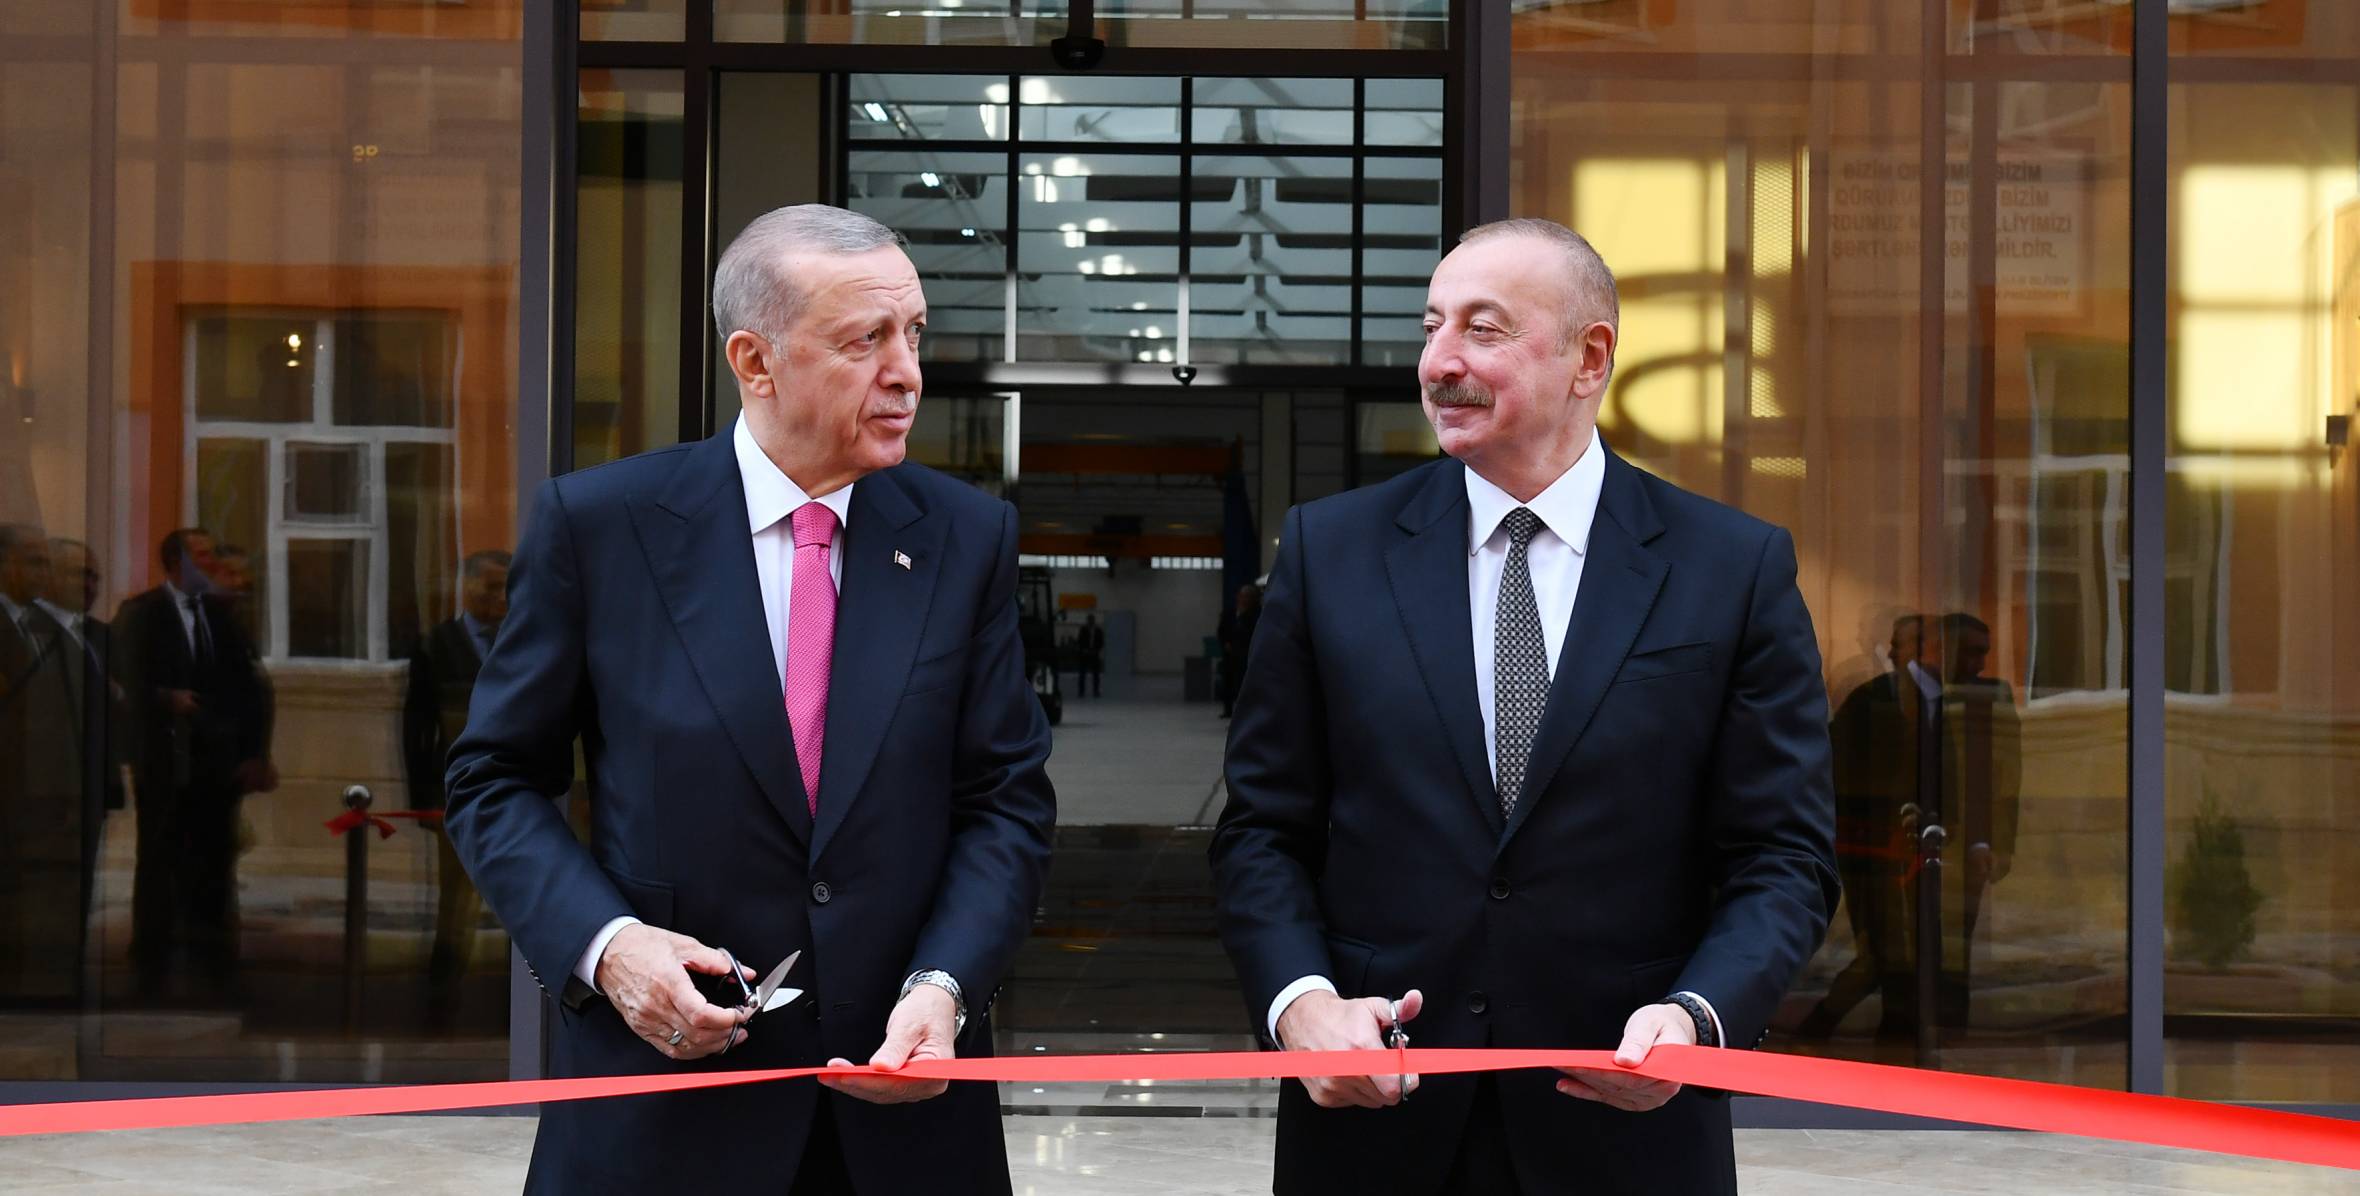 Ilham Aliyev and Recep Tayyip Erdogan attended the opening of the Nakhchivan Military Repair and Production Complex